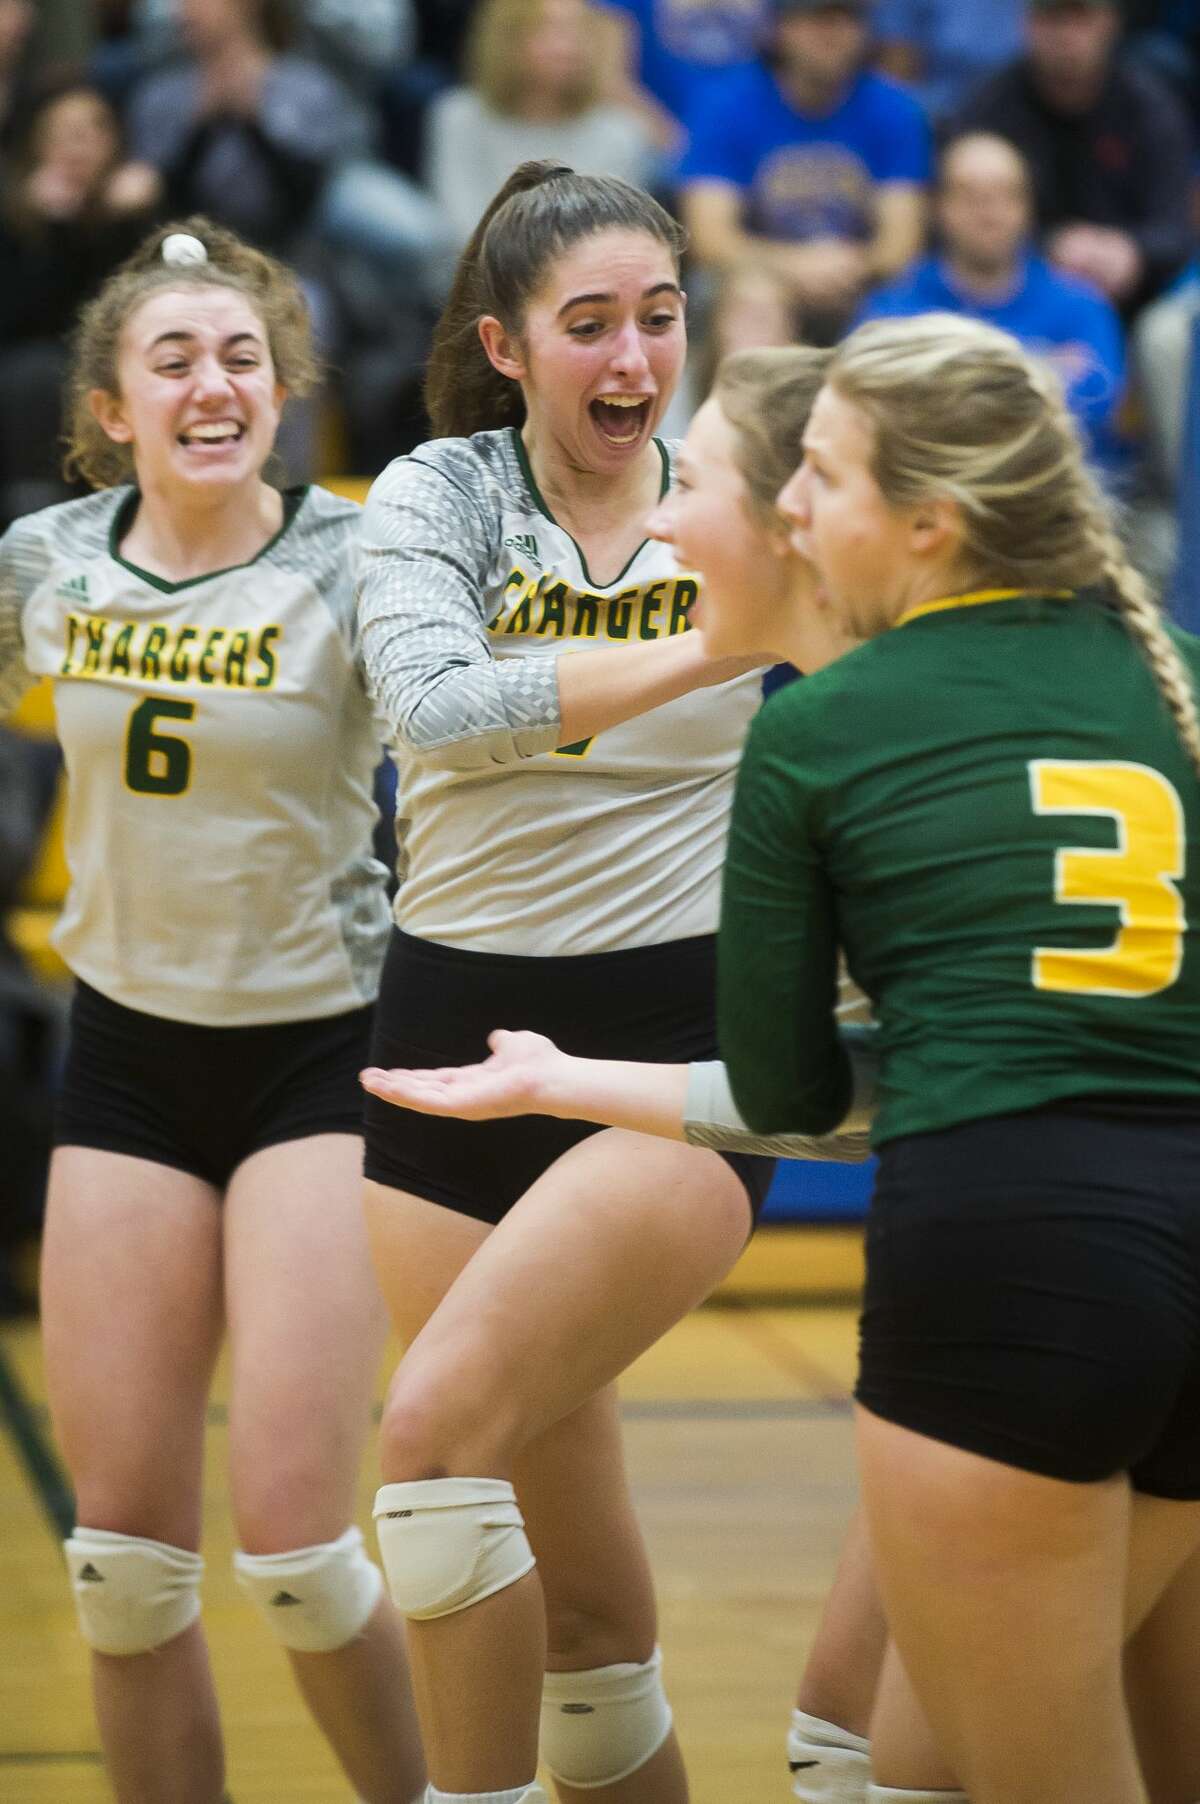 Dow players celebrate a point during the Chargers' district semifinal against Midland Wednesday, Nov. 6, 2019 at Midland High School. (Katy Kildee/kkildee@mdn.net)